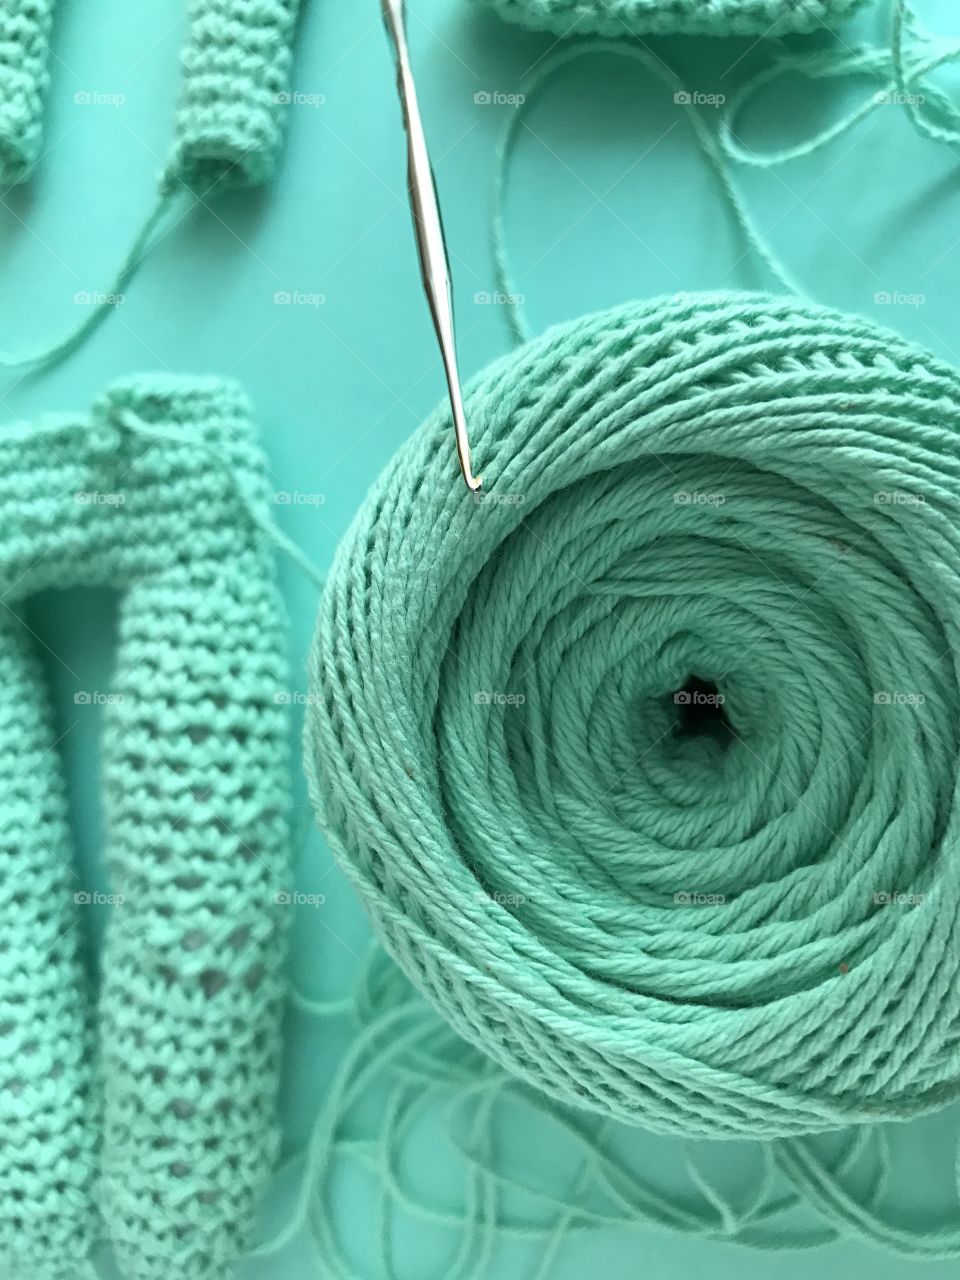 Knitting elements on green background 